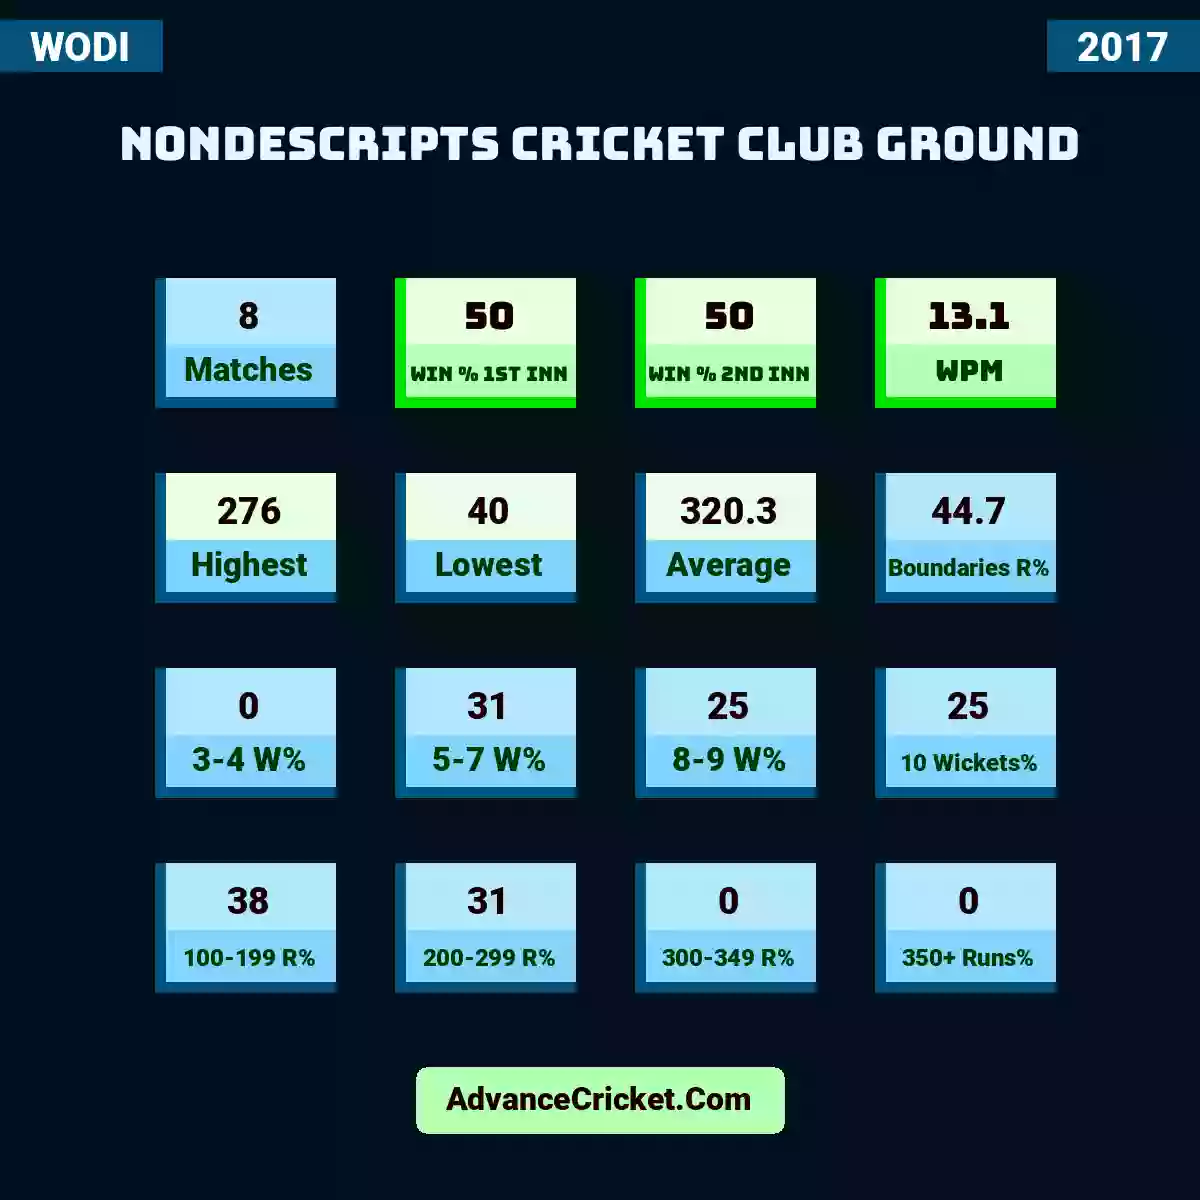 Image showing Nondescripts Cricket Club Ground with Matches: 8, Win % 1st Inn: 50, Win % 2nd Inn: 50, WPM: 13.1, Highest: 276, Lowest: 40, Average: 320.3, Boundaries R%: 44.7, 3-4 W%: 0, 5-7 W%: 31, 8-9 W%: 25, 10 Wickets%: 25, 100-199 R%: 38, 200-299 R%: 31, 300-349 R%: 0, 350+ Runs%: 0.